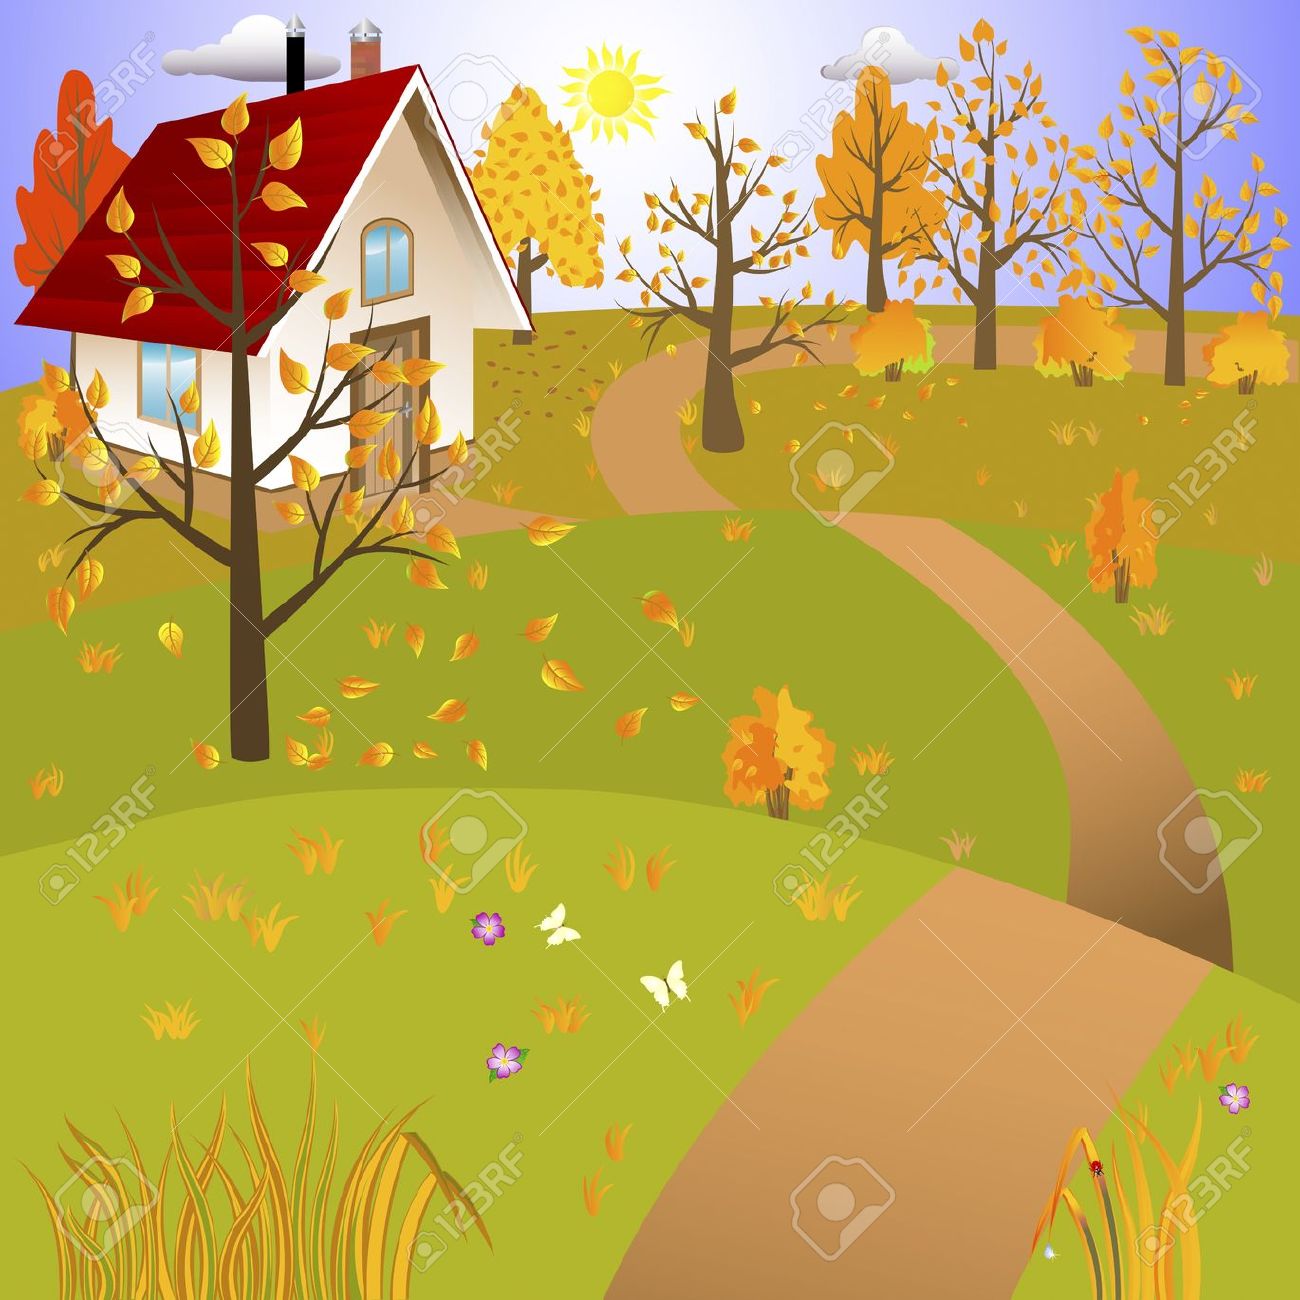 free clipart of fall scenes - photo #41